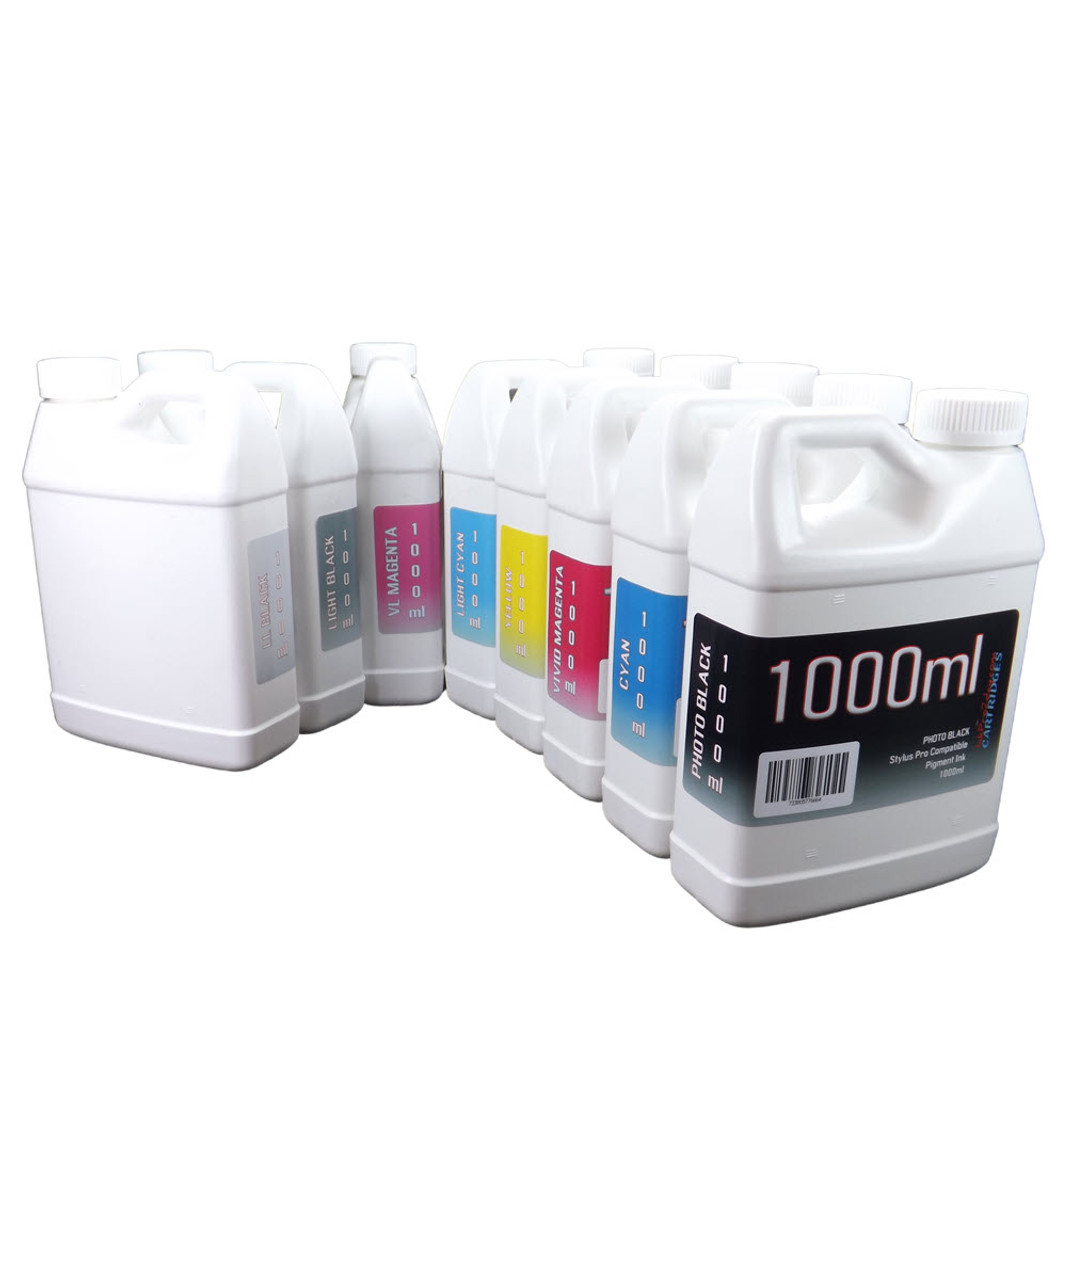 8- 1000ml Bottles Compatible UltraChrome K3 Pigment Ink for Epson Stylus Pro 4880 Printers